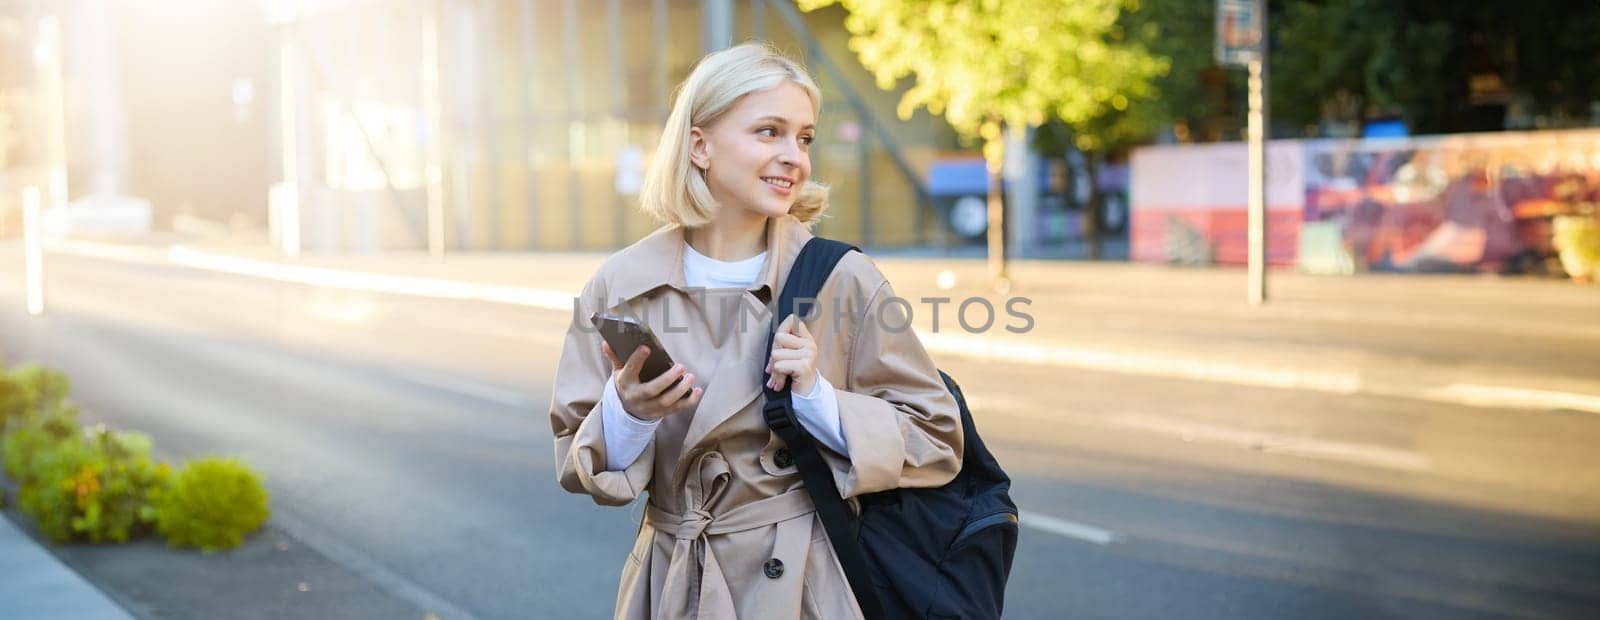 Portrait of young blonde woman with smartphone, holds backpack, waits for taxi on street, looking at the road and smiling, using mobile phone app.